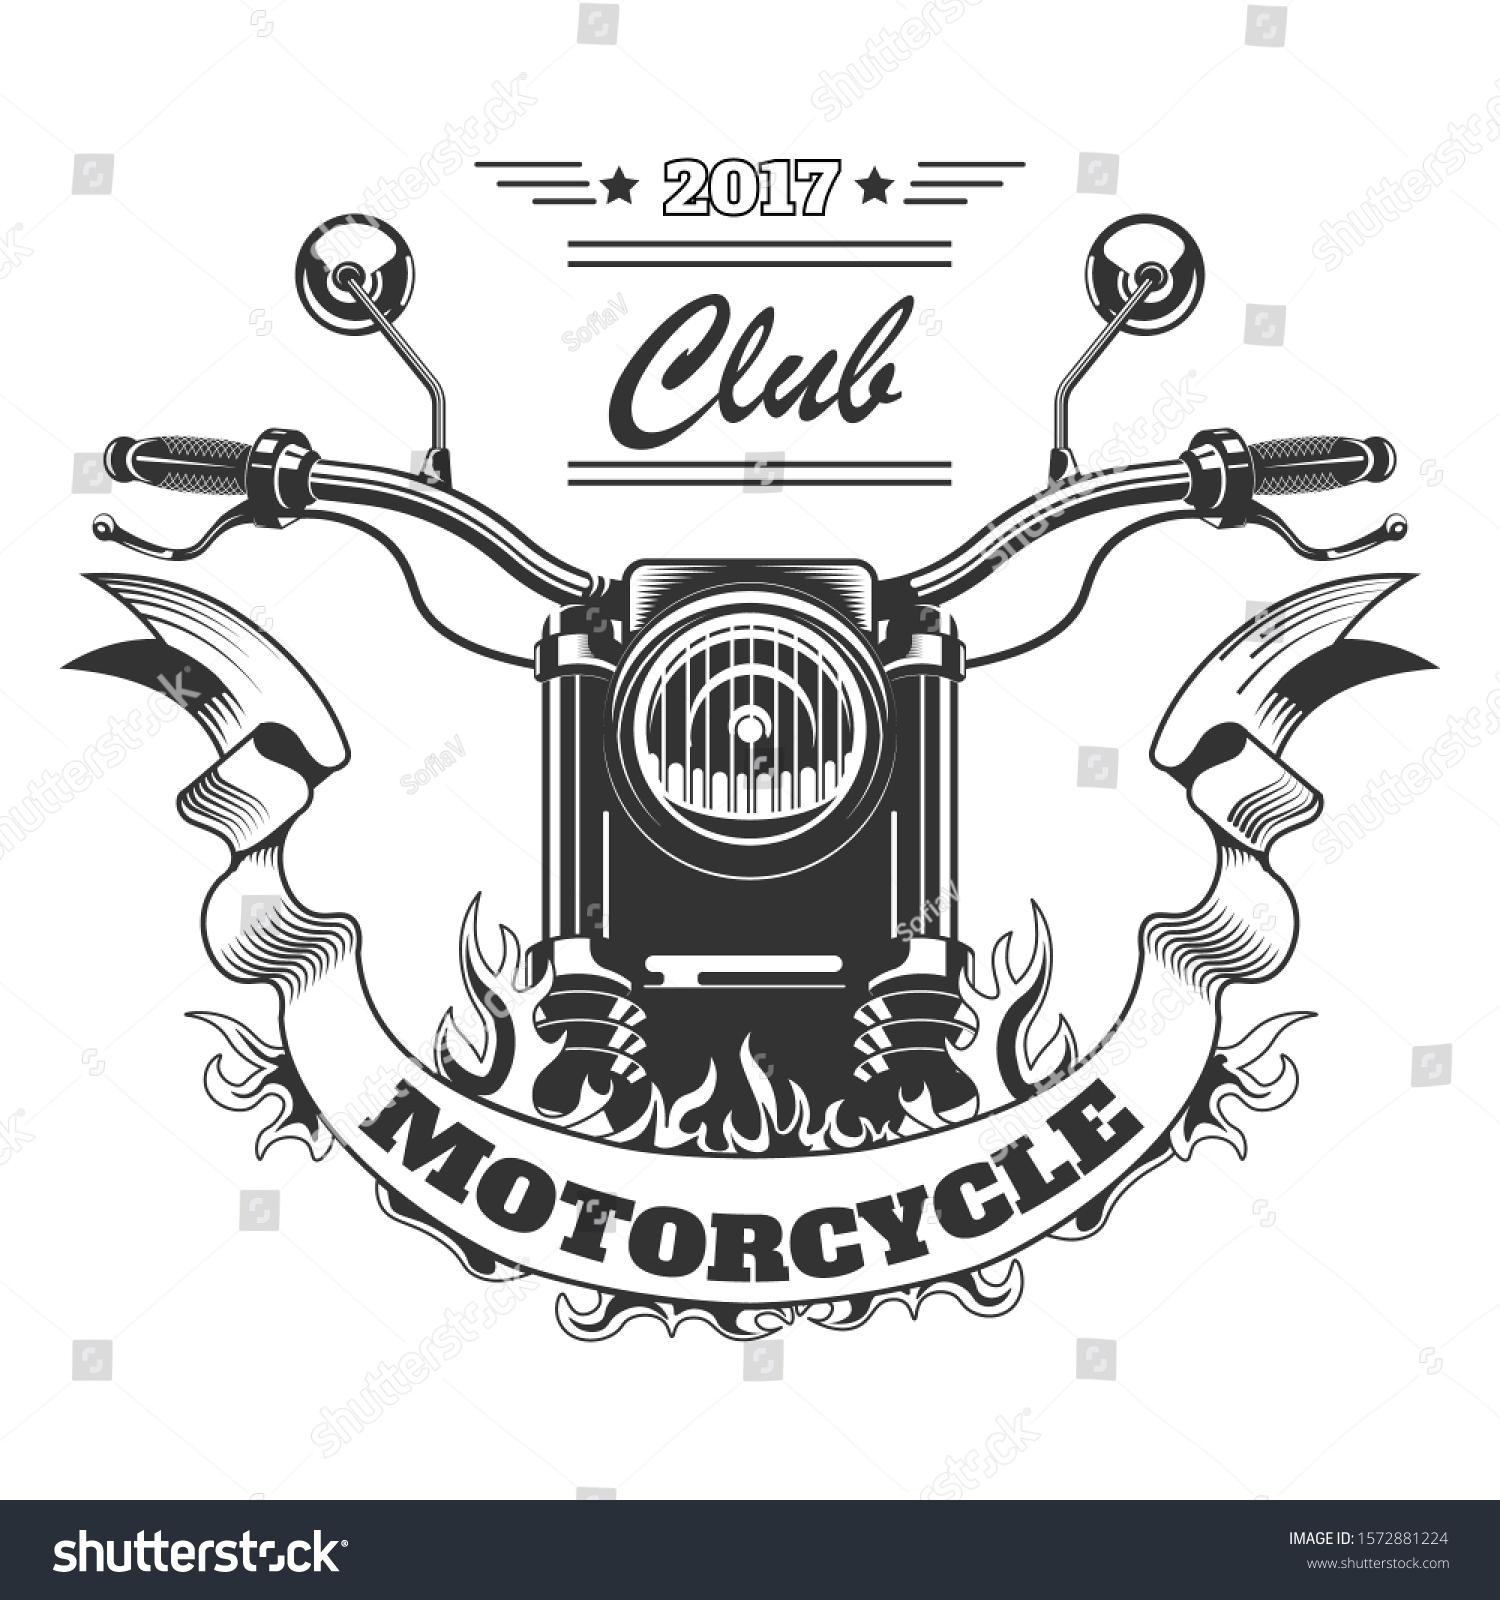 Motorcycle Racing Club Bikers Community Isolated Stock Vector (Royalty ...